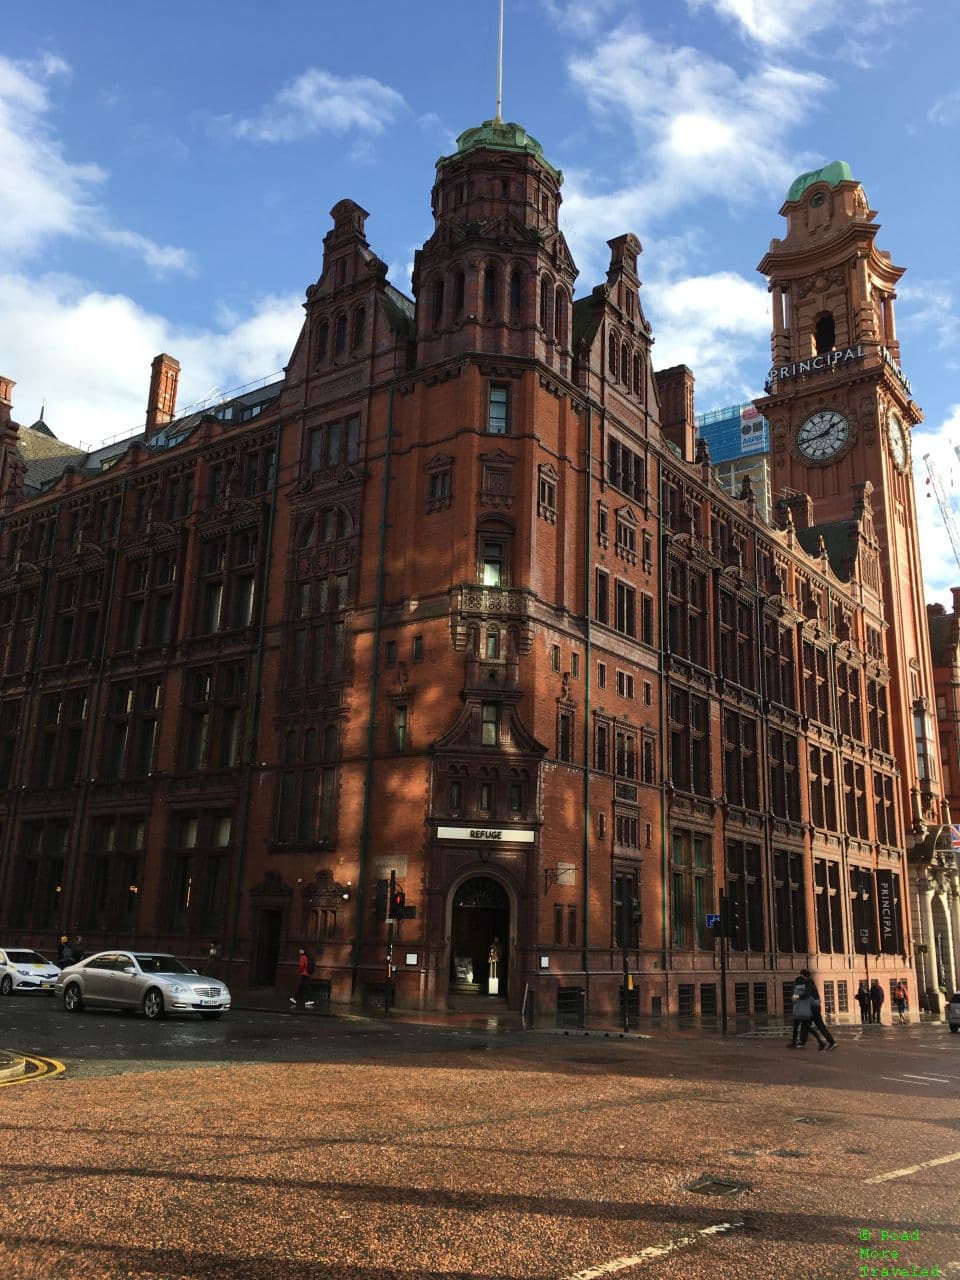 Sunday roasting and more in Manchester - Kimpton Clocktower hotel